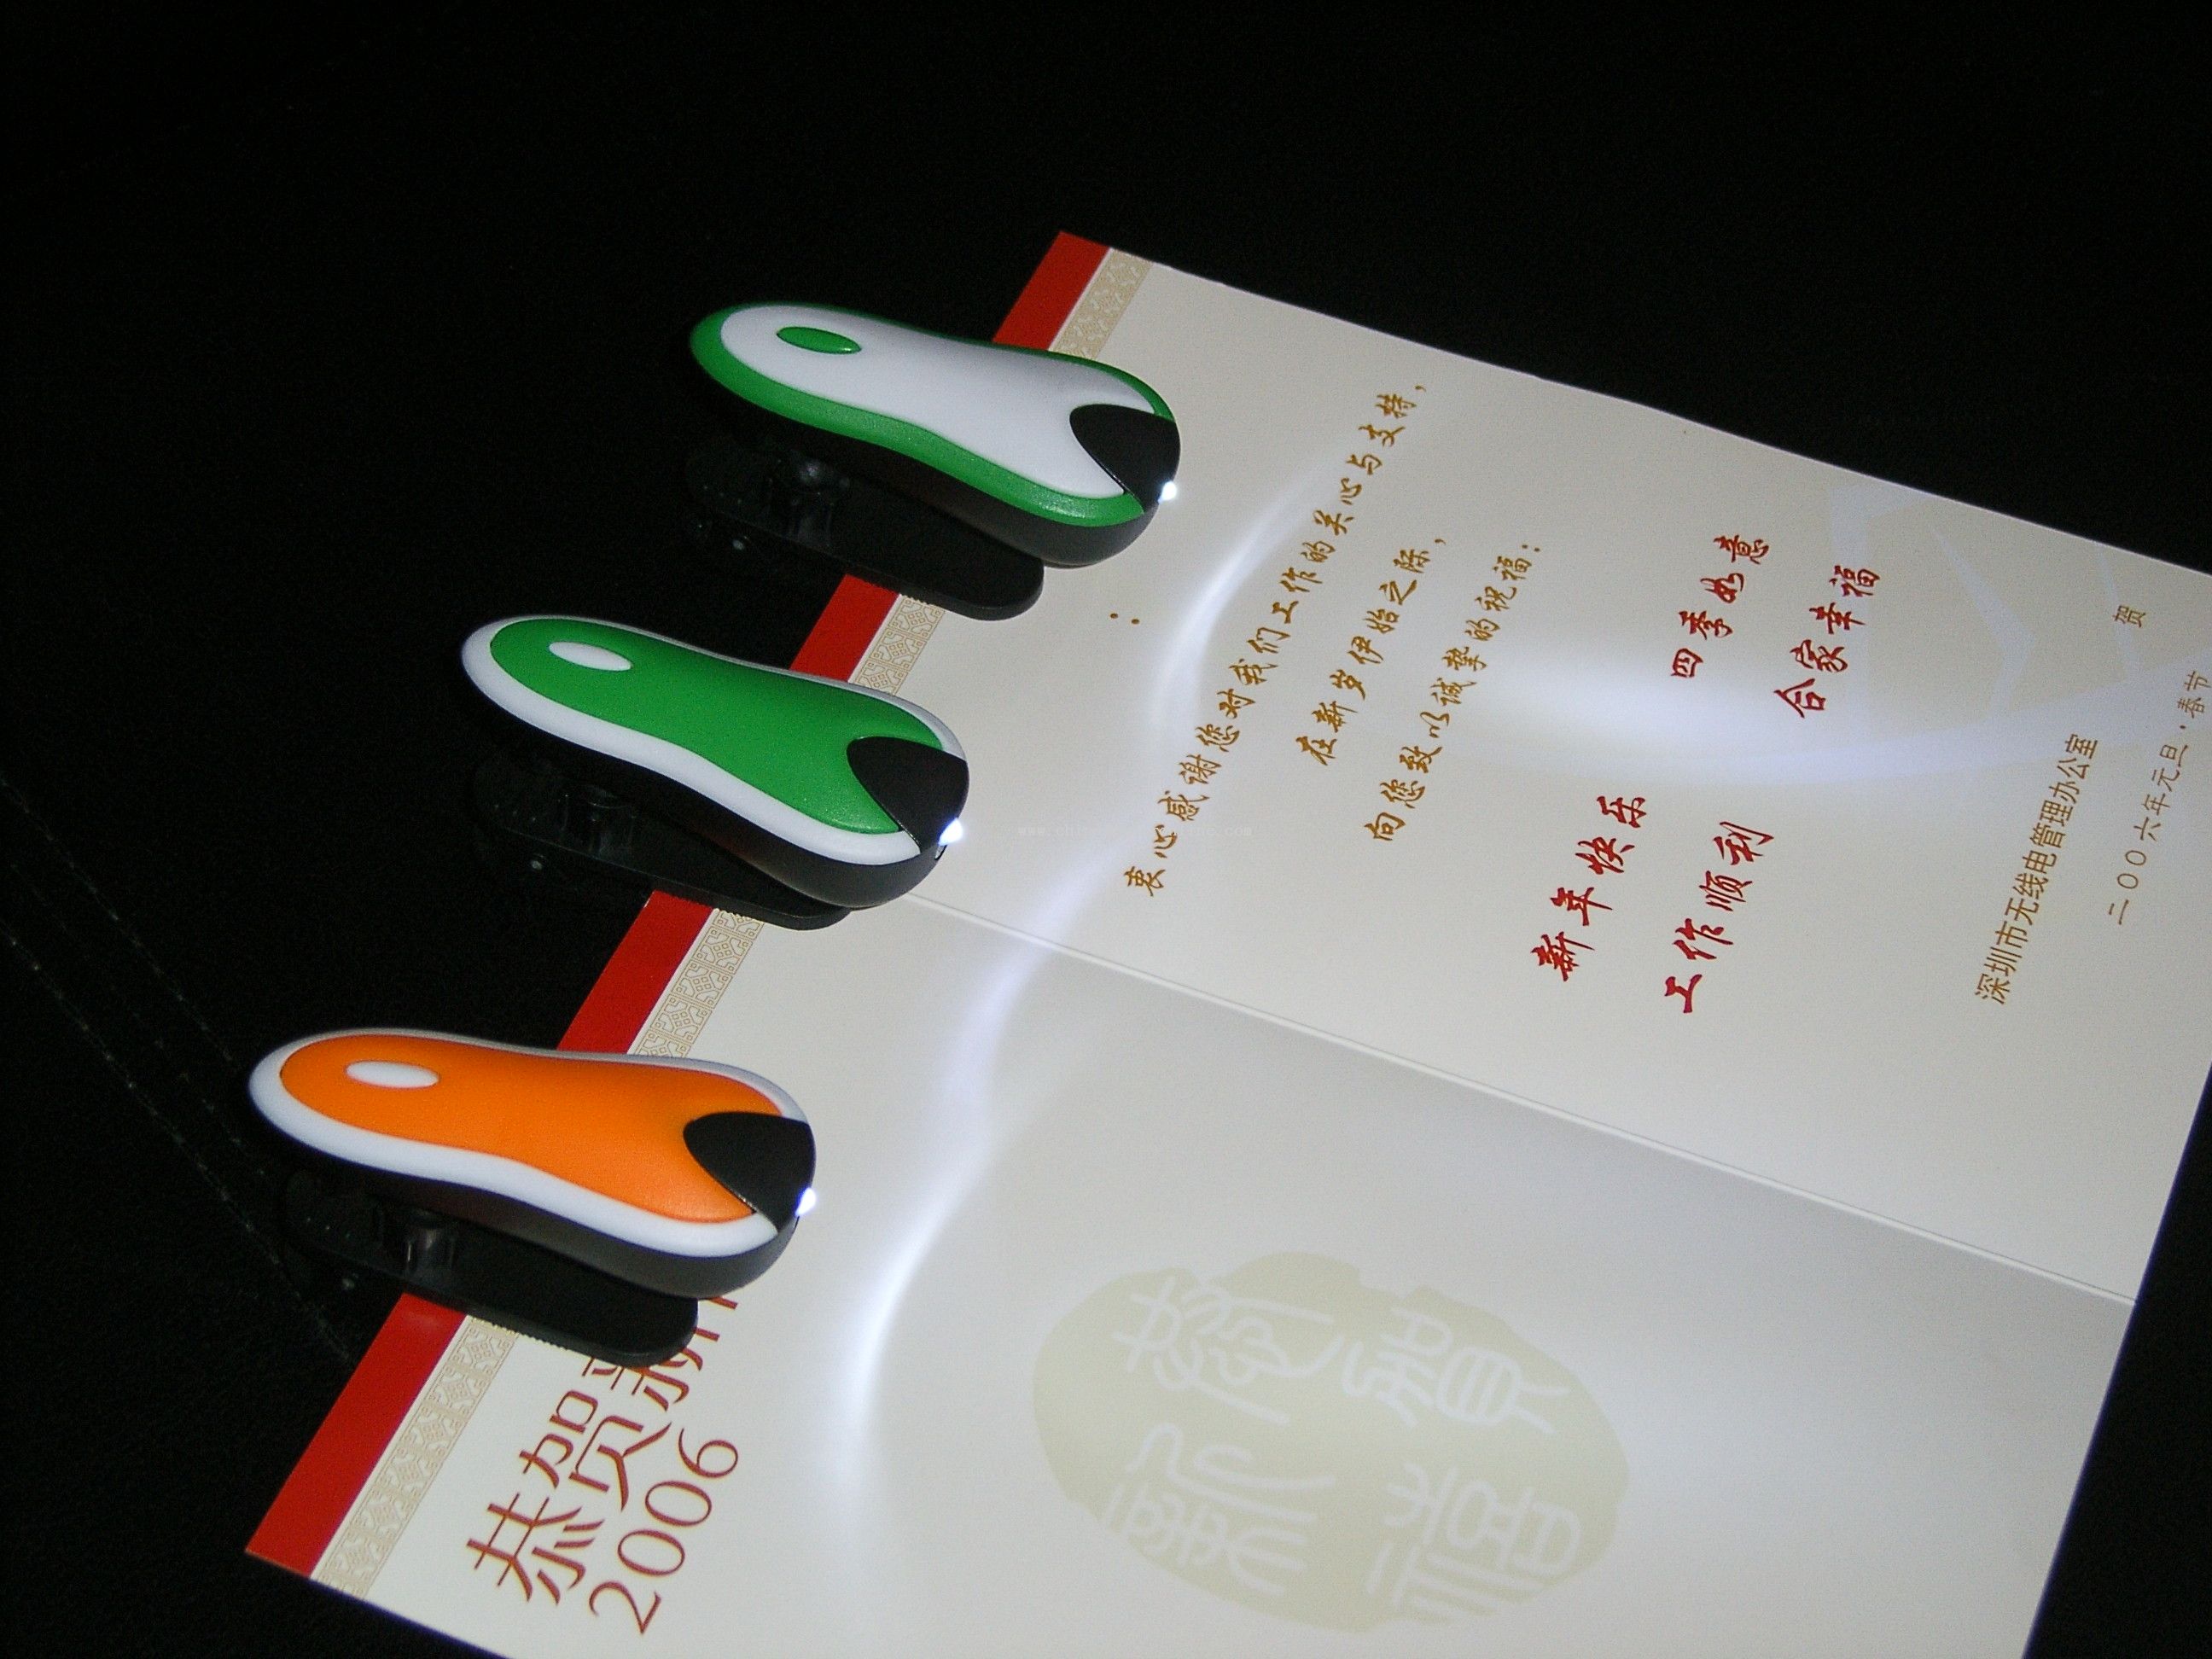 Mini book light from China